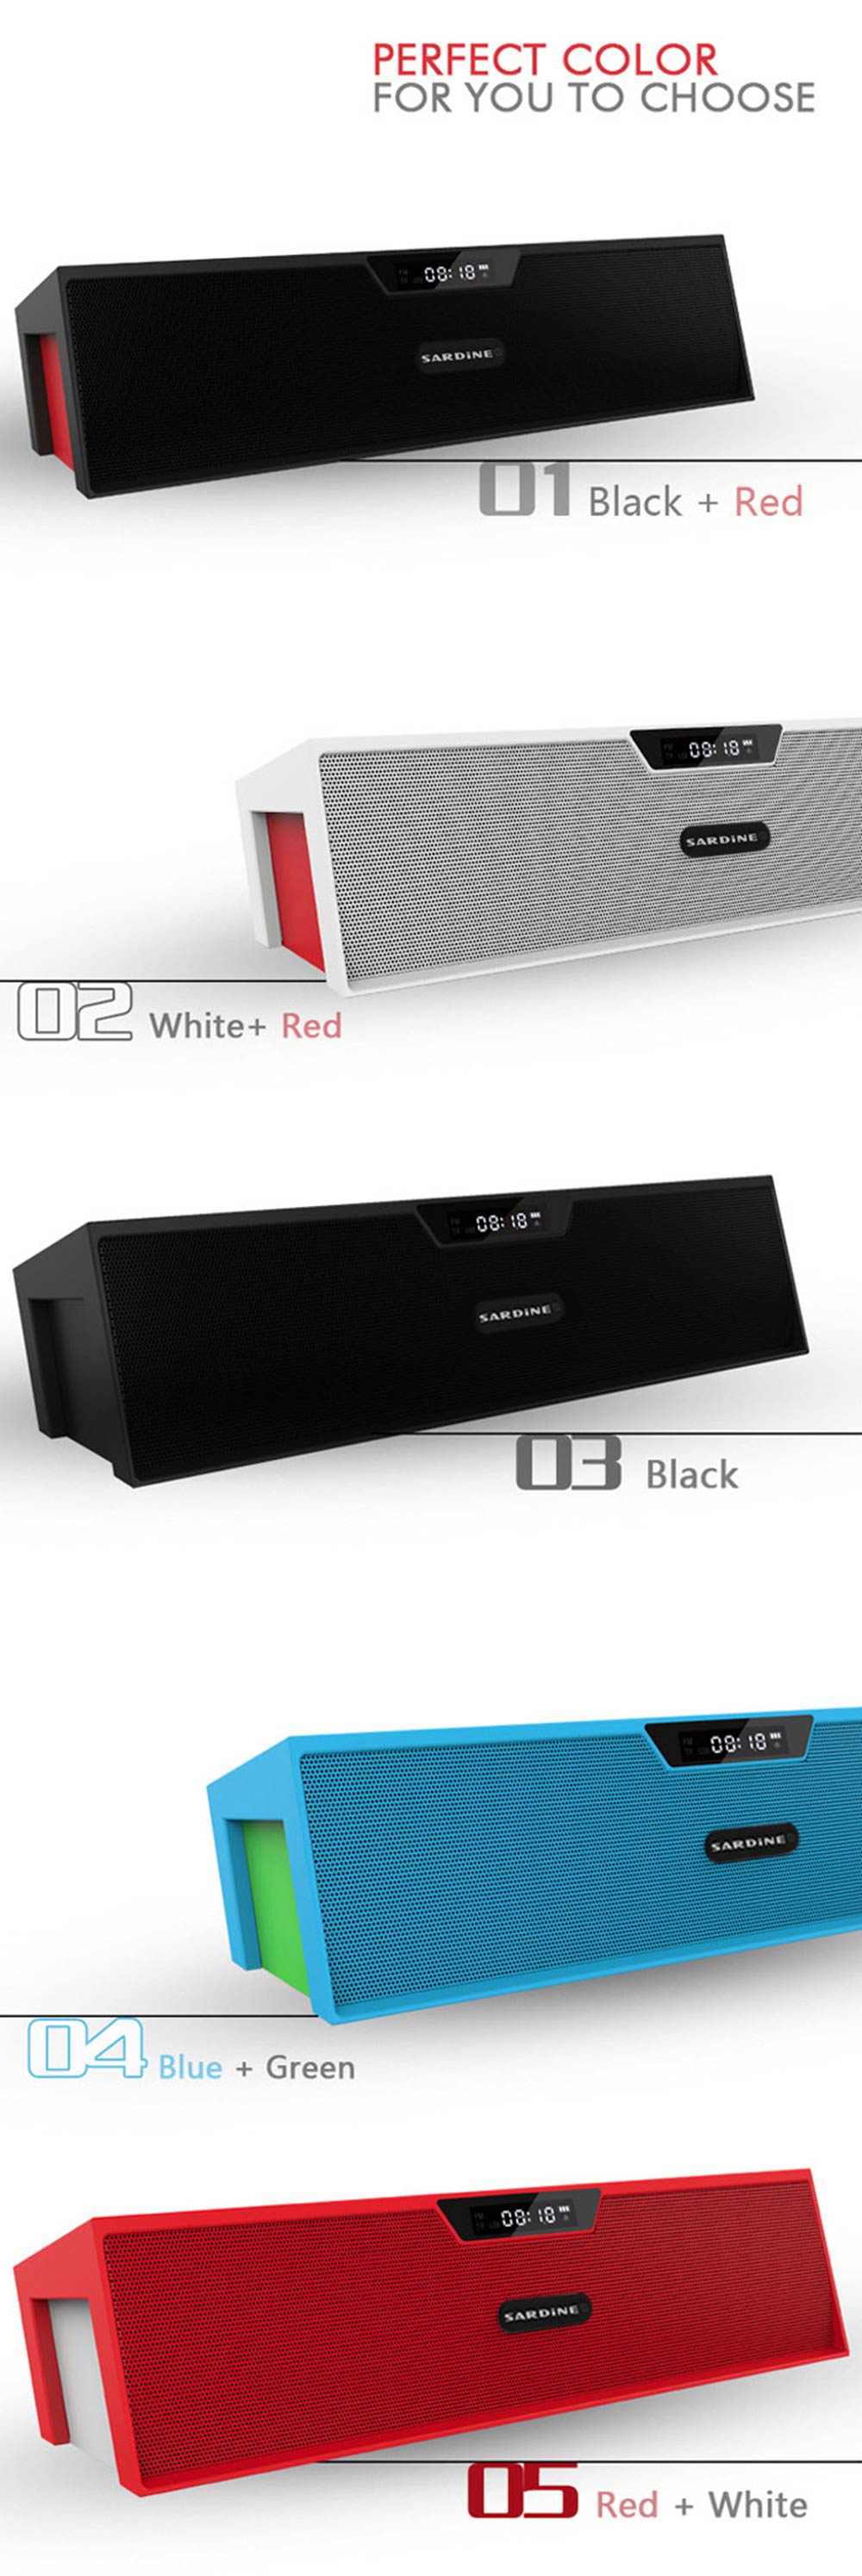 SARDiNE SDY019 Wireless Bluetooth Speaker Double Loudspeaker Pure Stereo Sound with USB TF Card Slot FM Alarm Clock Functions